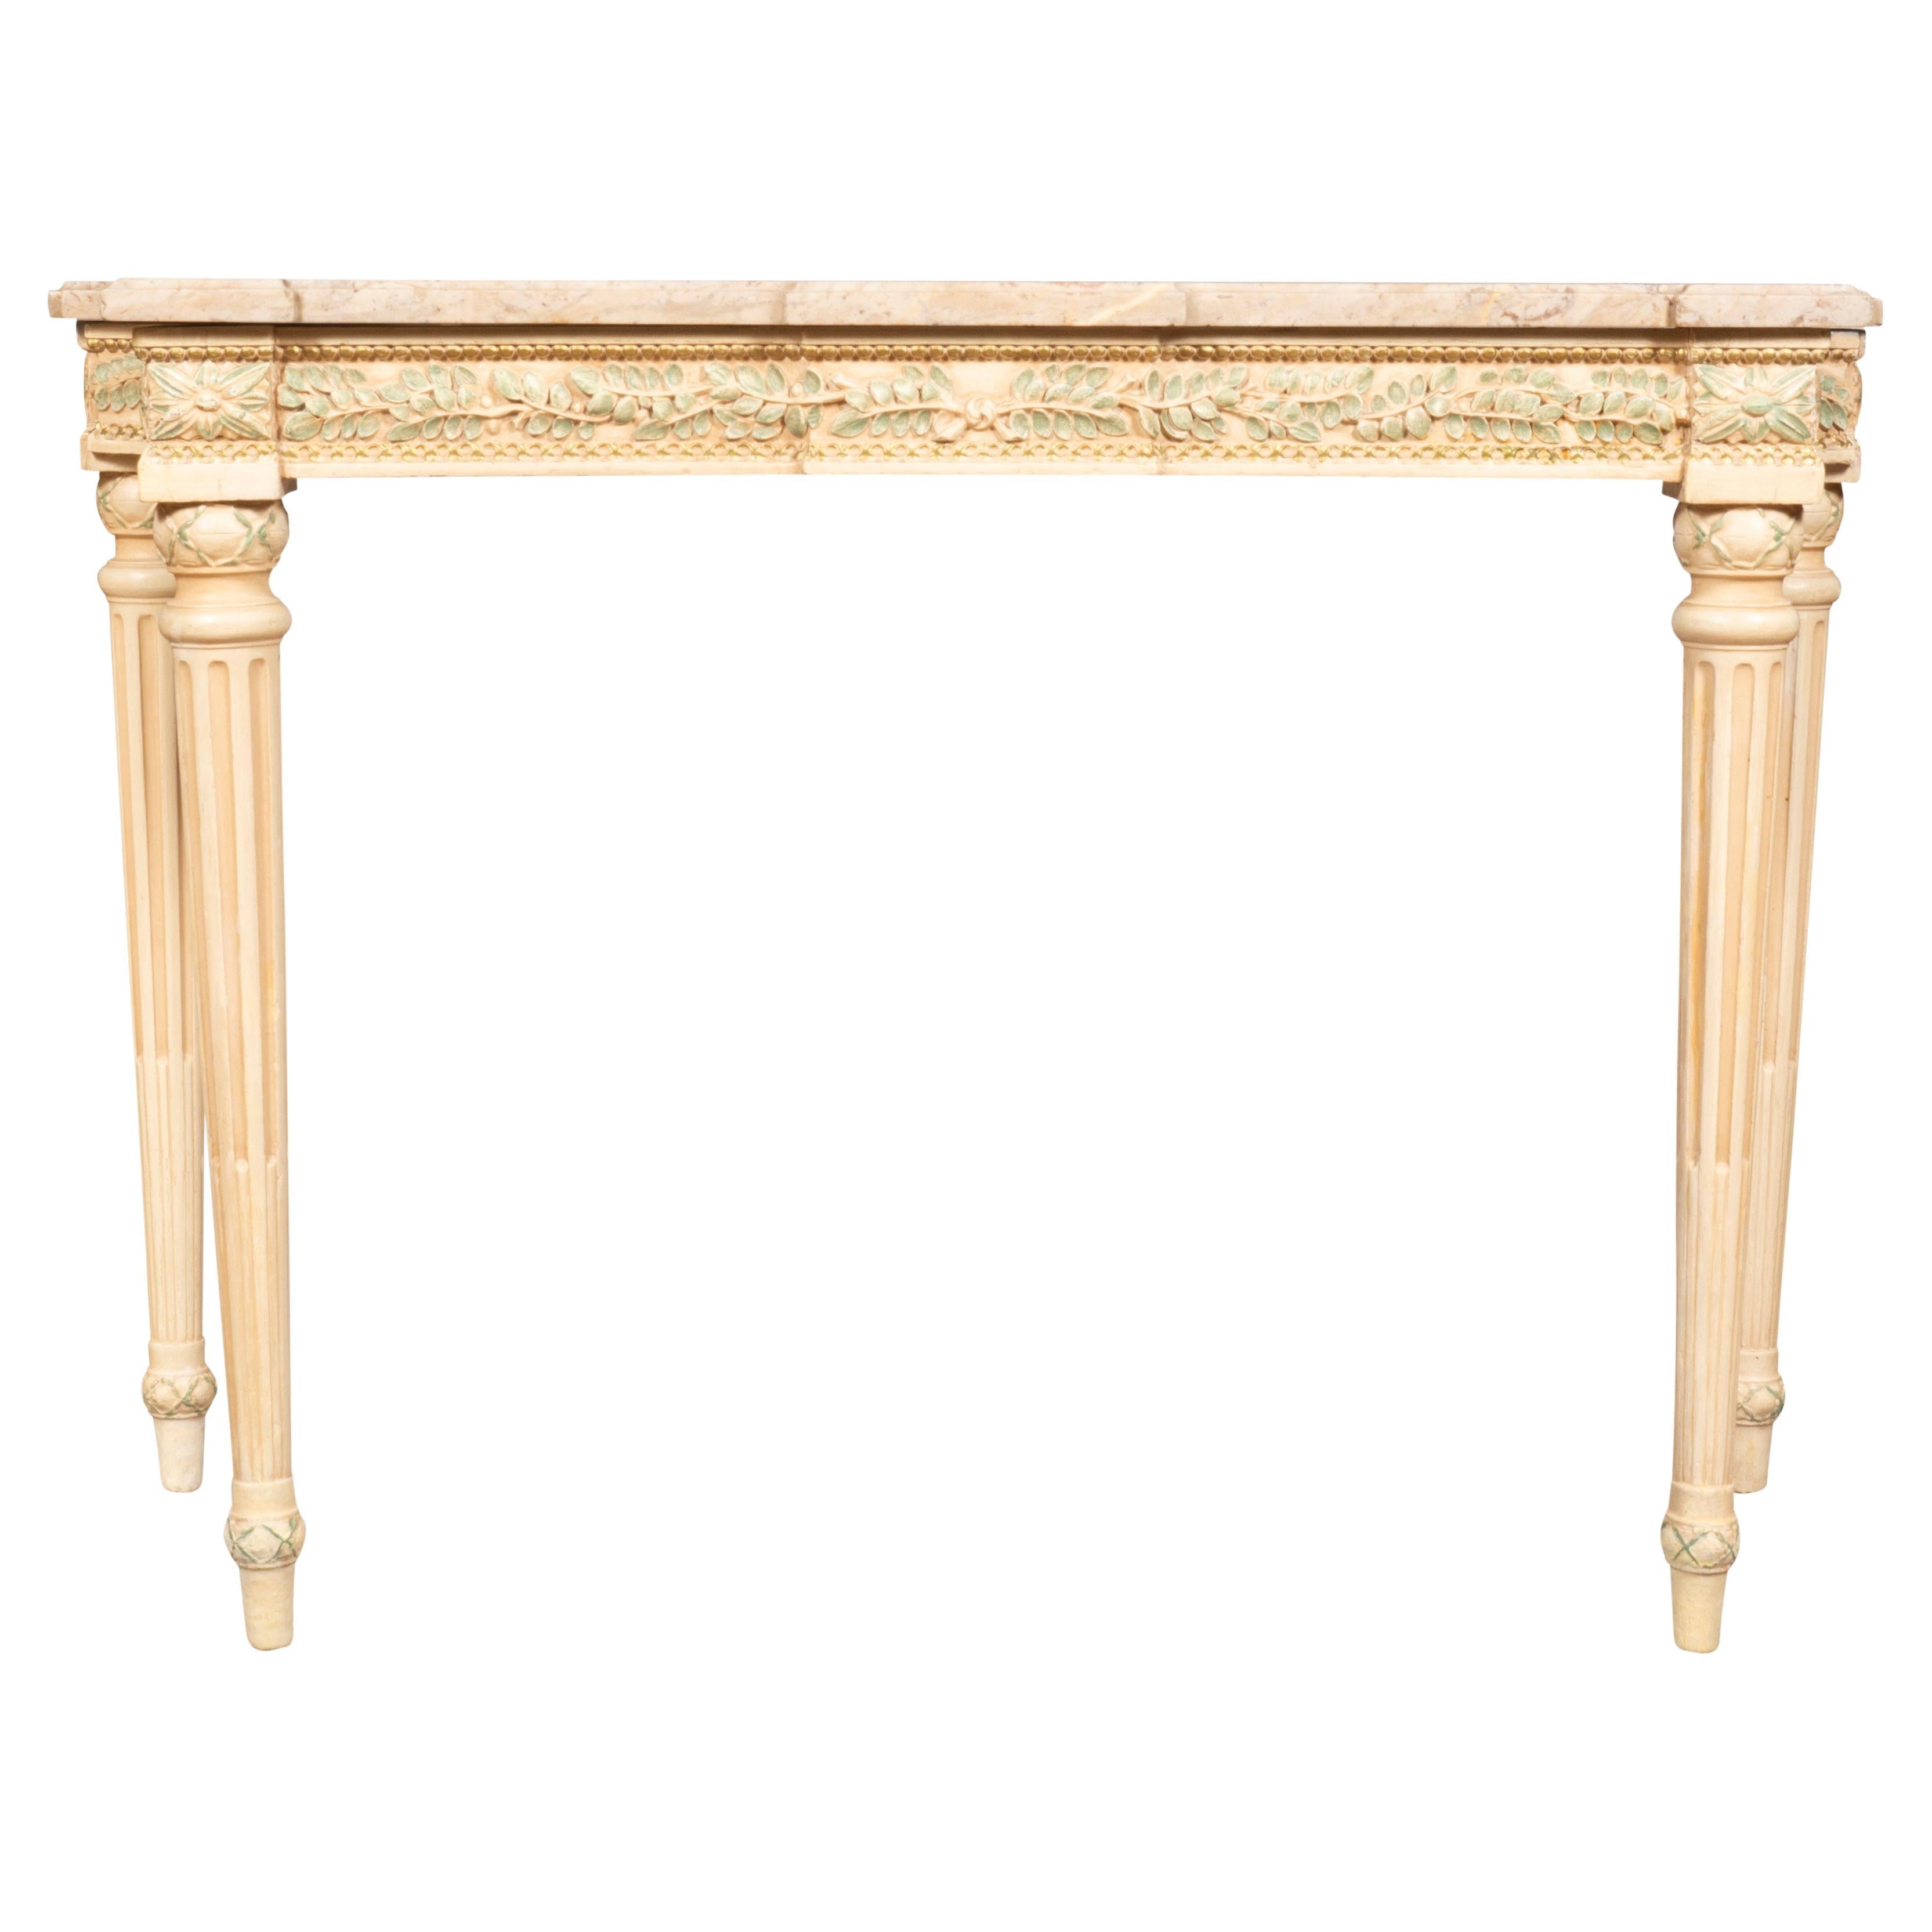 From the Waldorf Towers original furniture with tags labelled Waldorf Astoria. With  well matched original marble tops over a frieze decorated with green painted laurel leaves with subtle gilded beading. Circular tapered fluted legs. This table